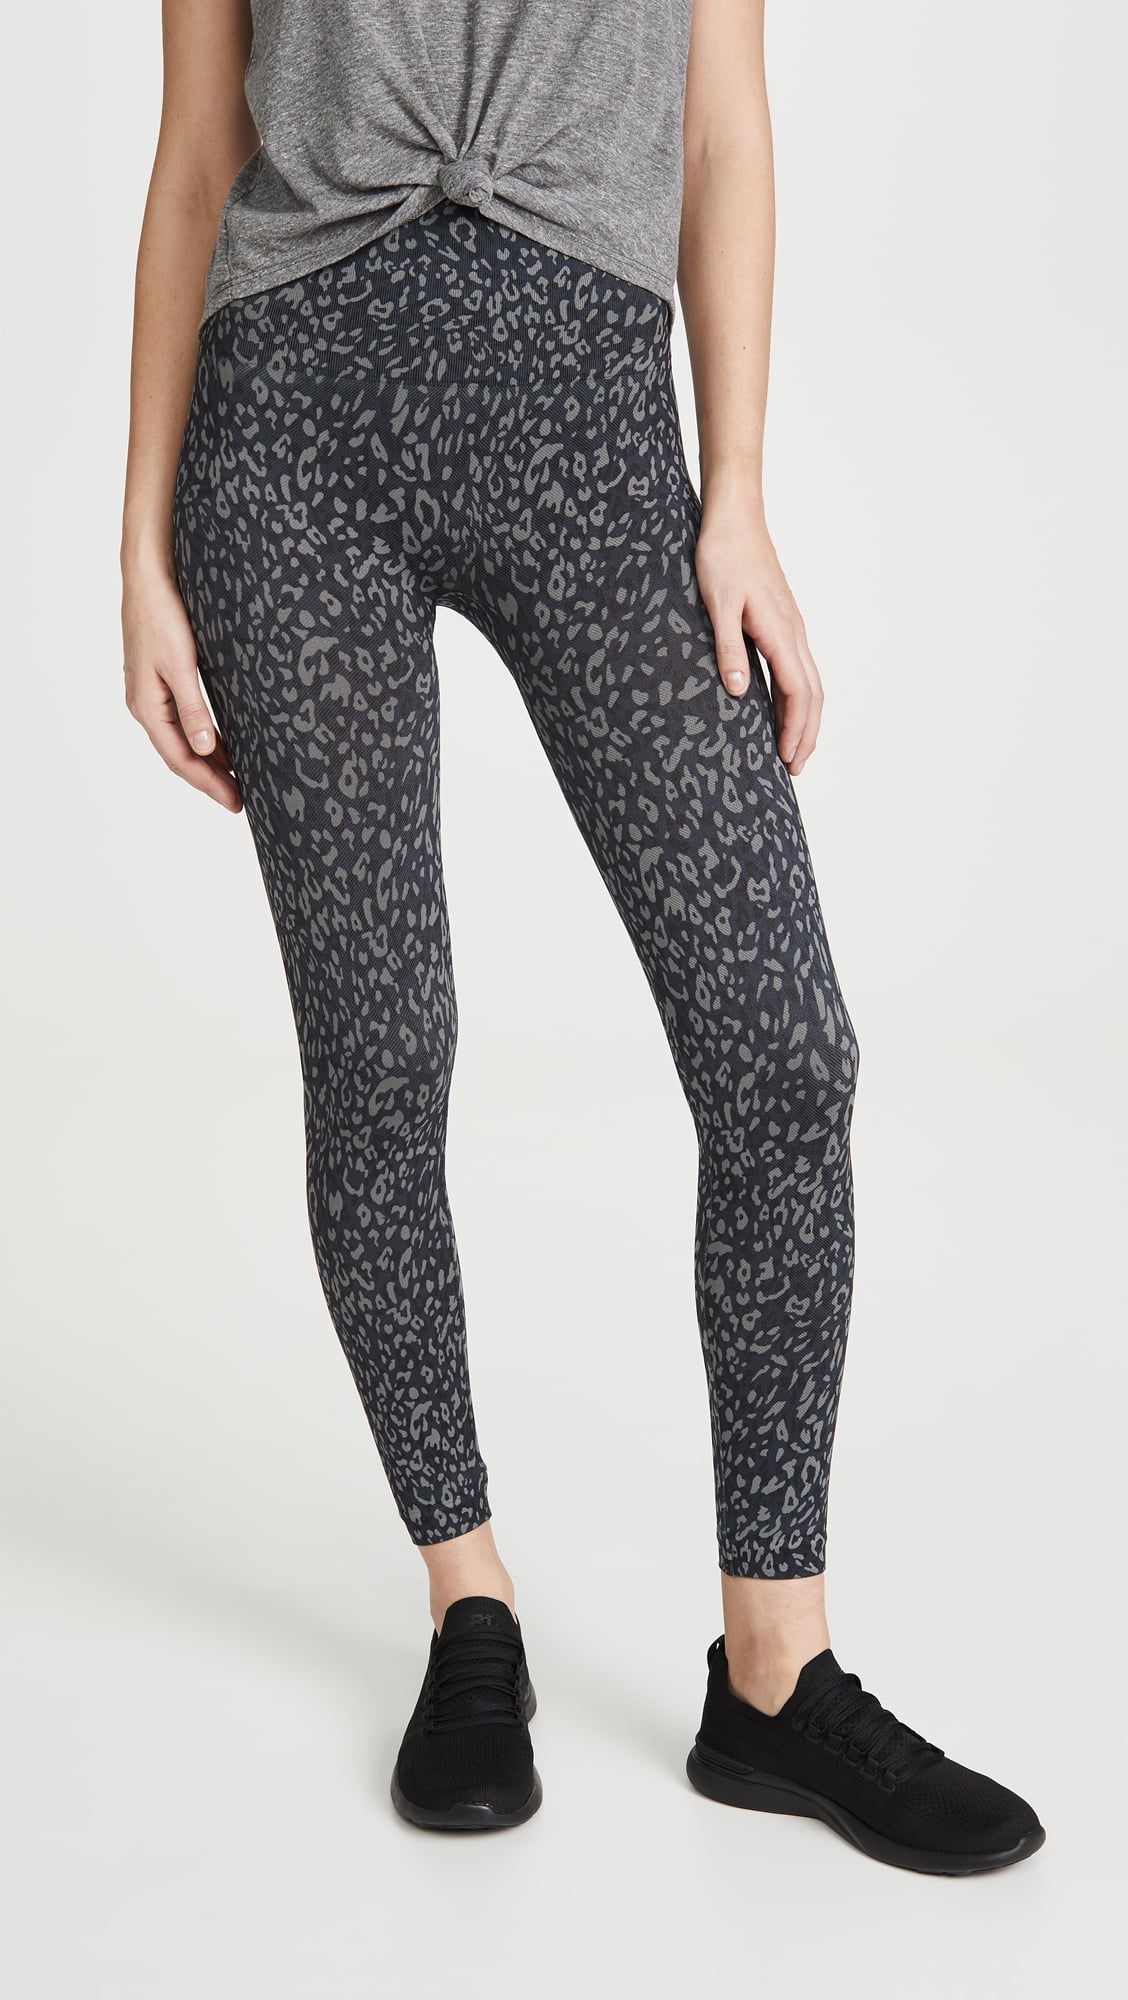 The Best Animal-Print Workout Leggings and Gear For Women